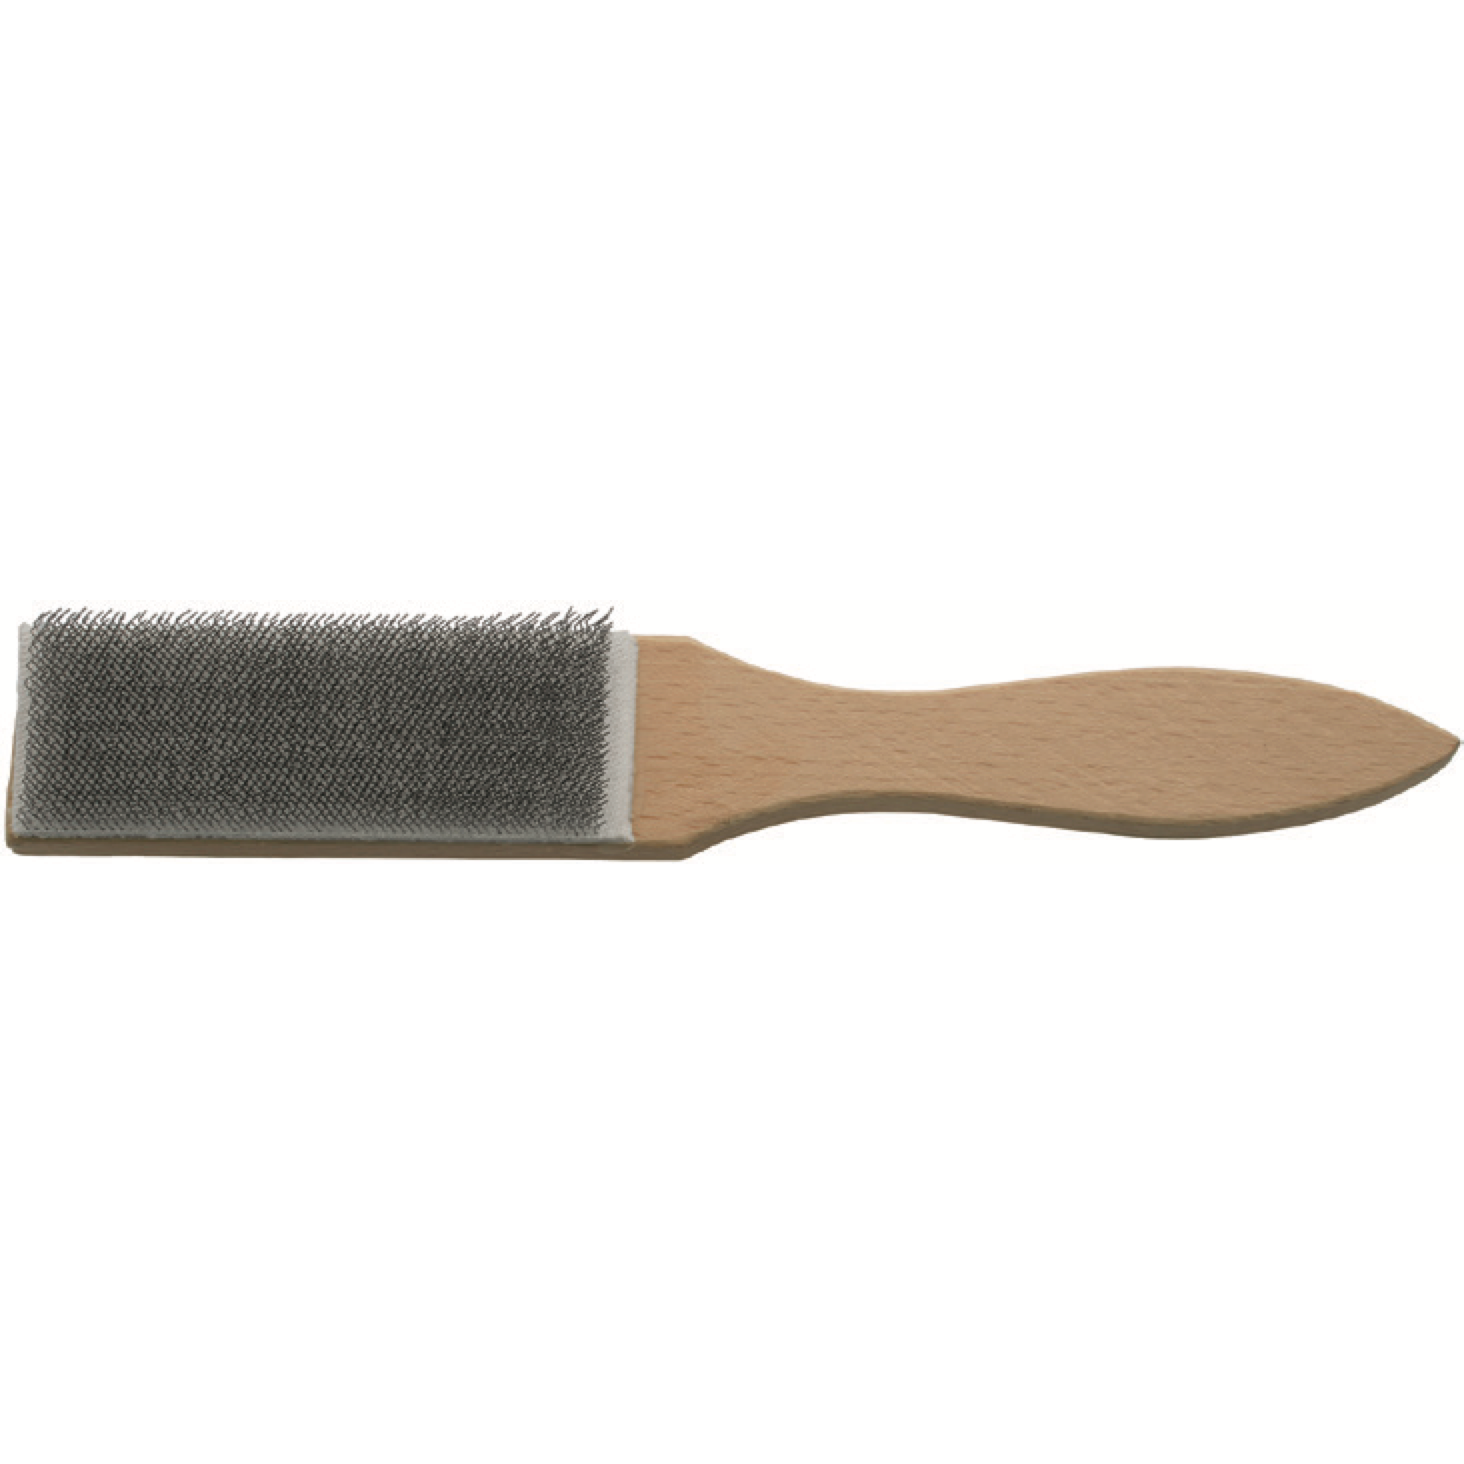 ELORA 250FB File Brush with Wooden Handle (ELORA Tools) - Premium File Brush from ELORA - Shop now at Yew Aik.